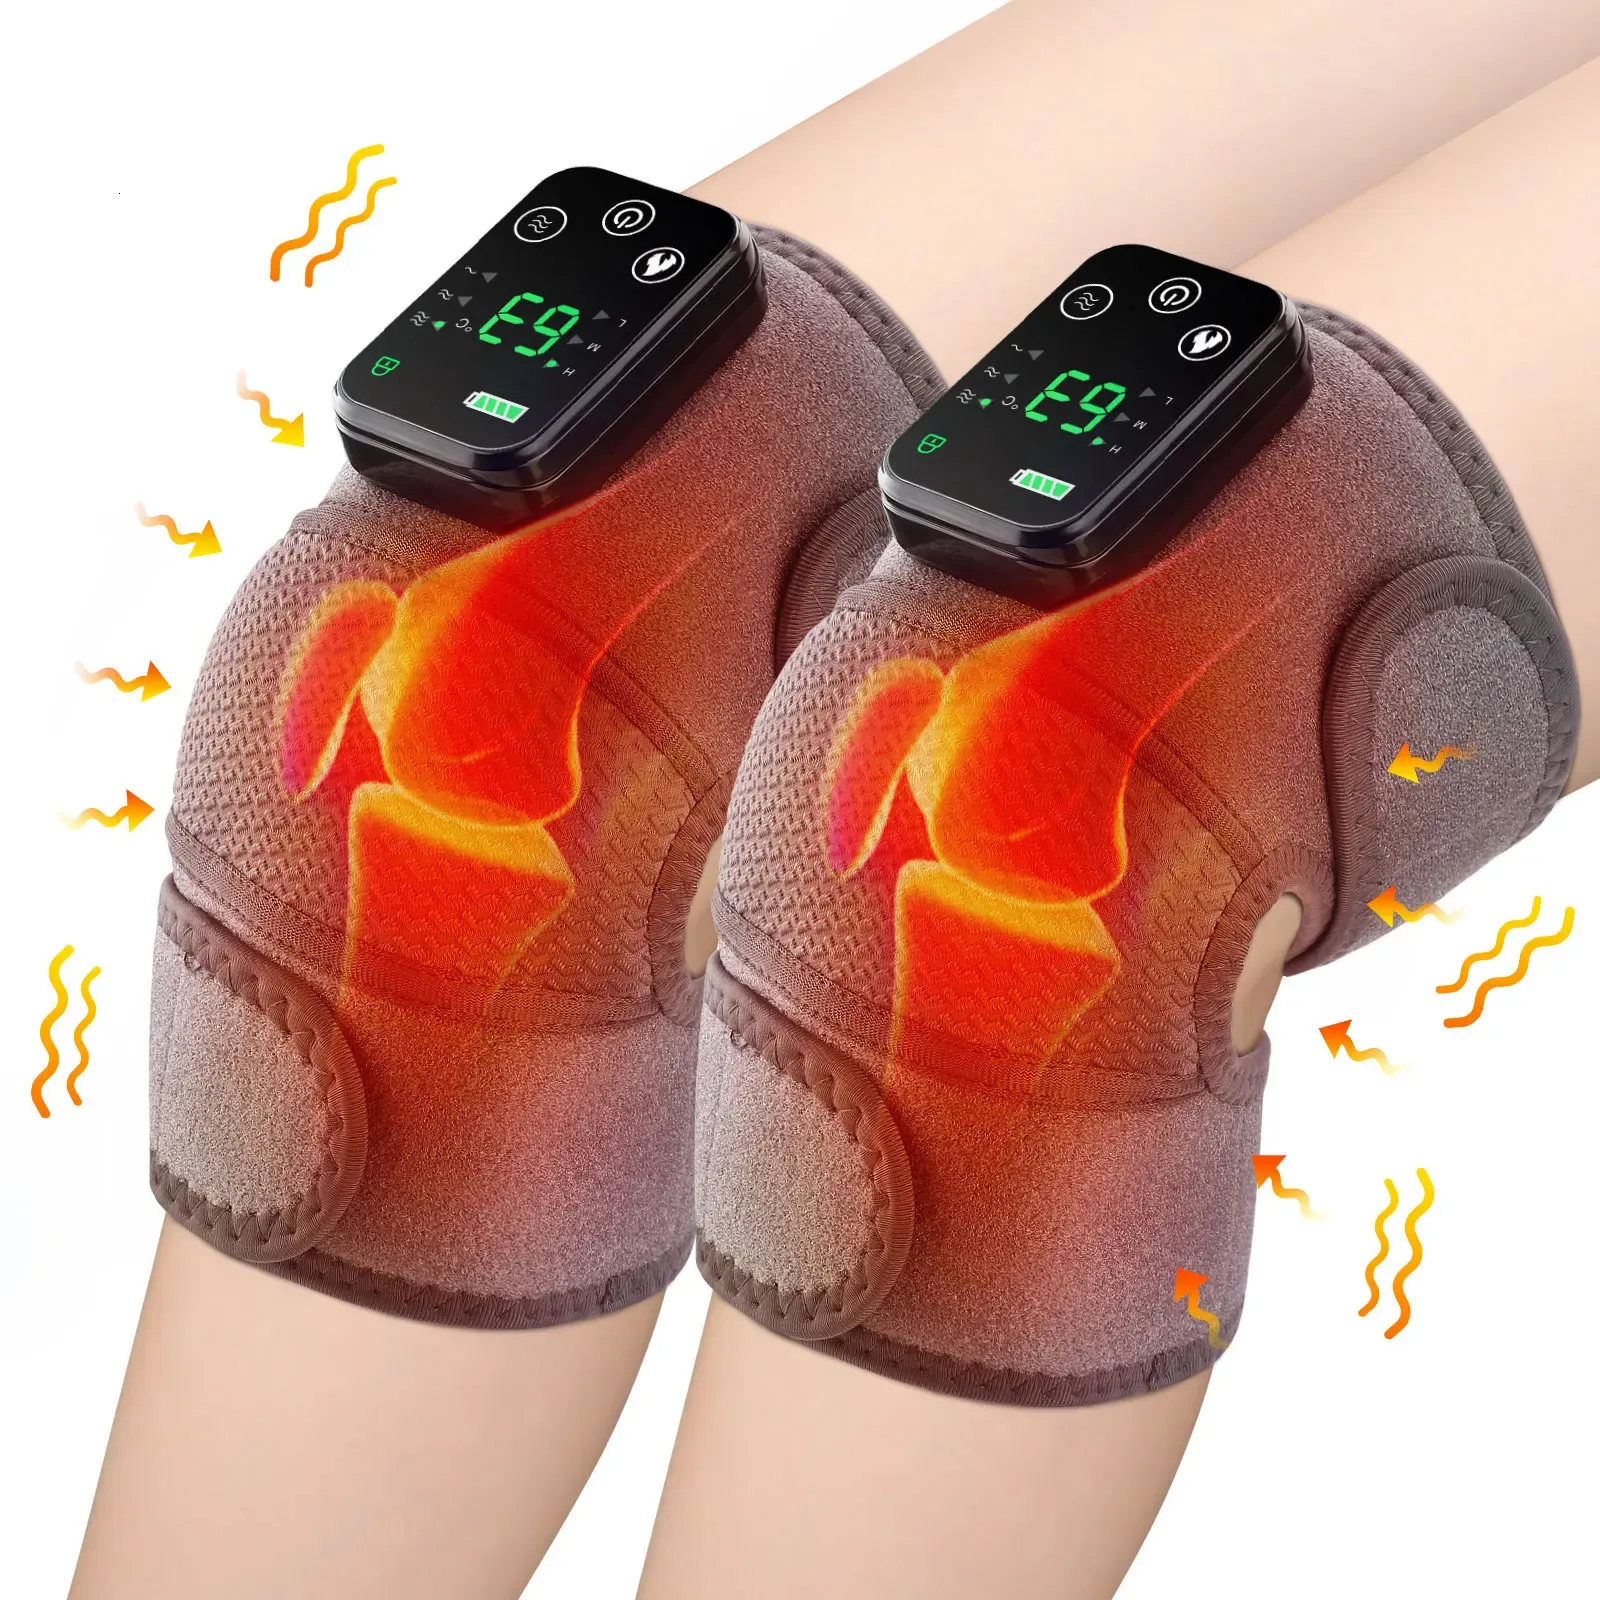 Other Massage Items Electric Knee Massager Heating Pad Vibration Massage Shoulder Elbow Support Belt Arthritis Pain Relief Temperature Therapy Brace 231020